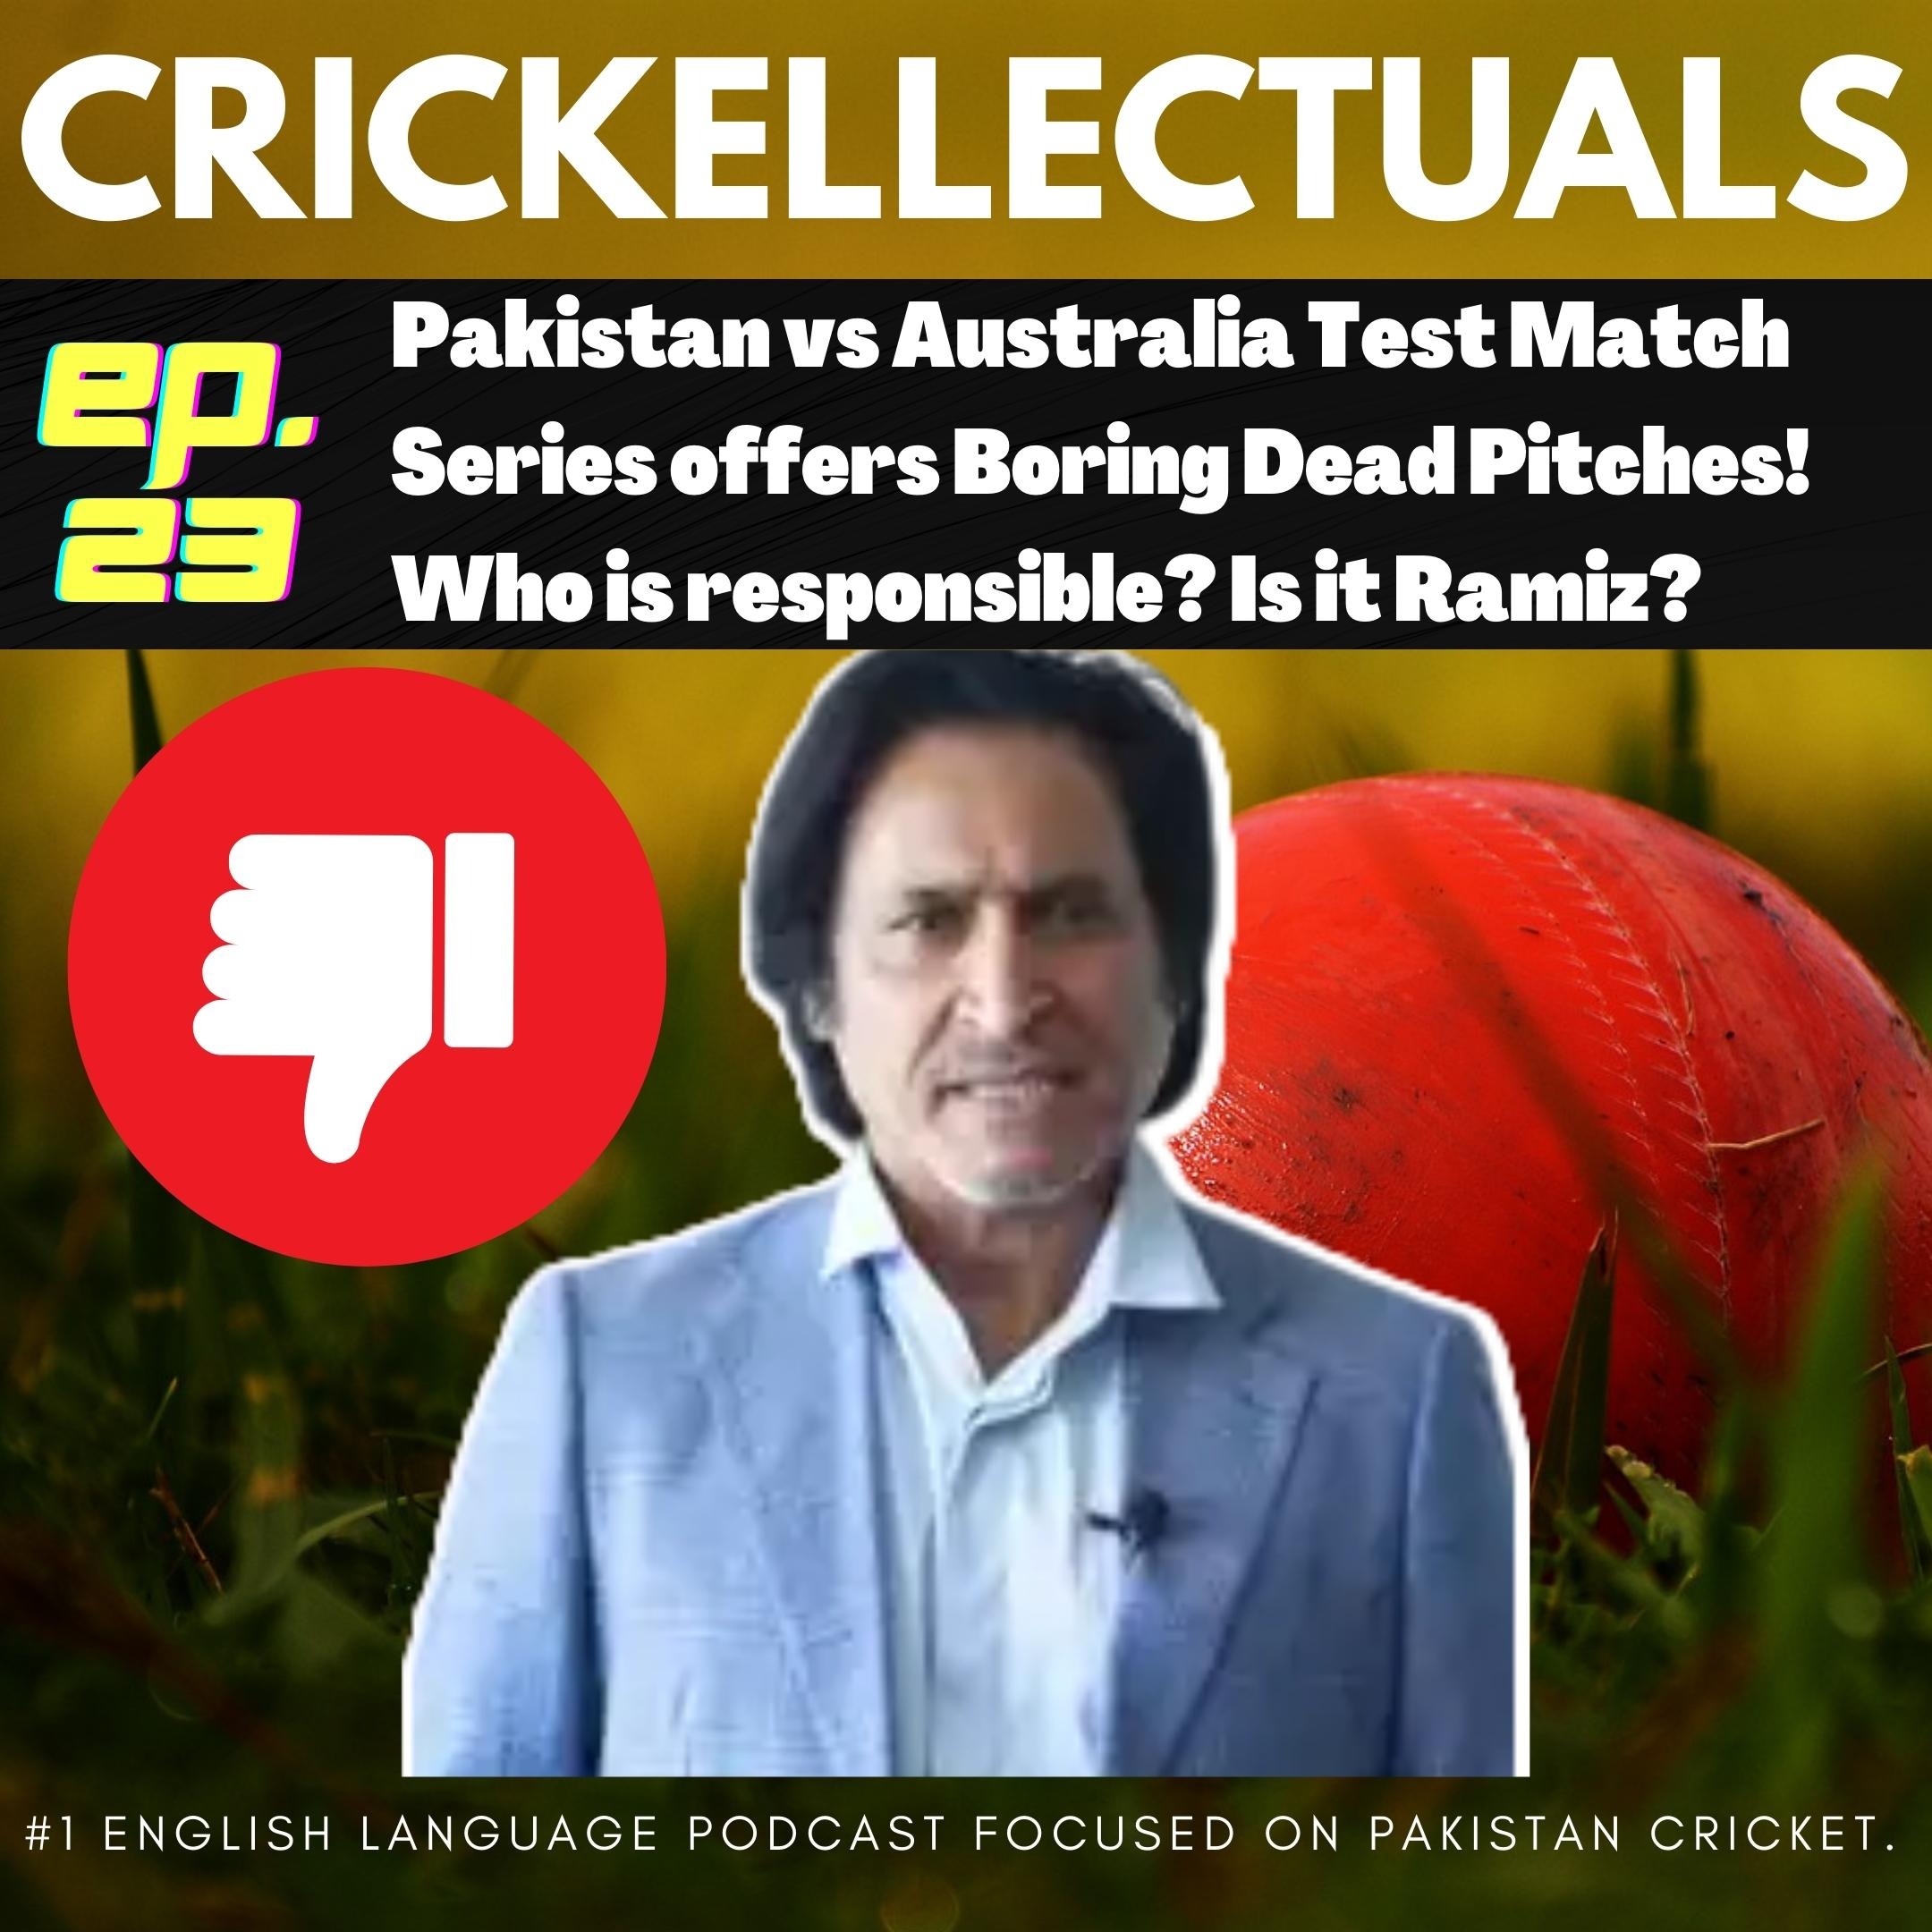 Ep. 23: Pakistan vs Australia Test Match Series offered Boring, Dead Pitches! Who is responsible? Is it Ramiz?